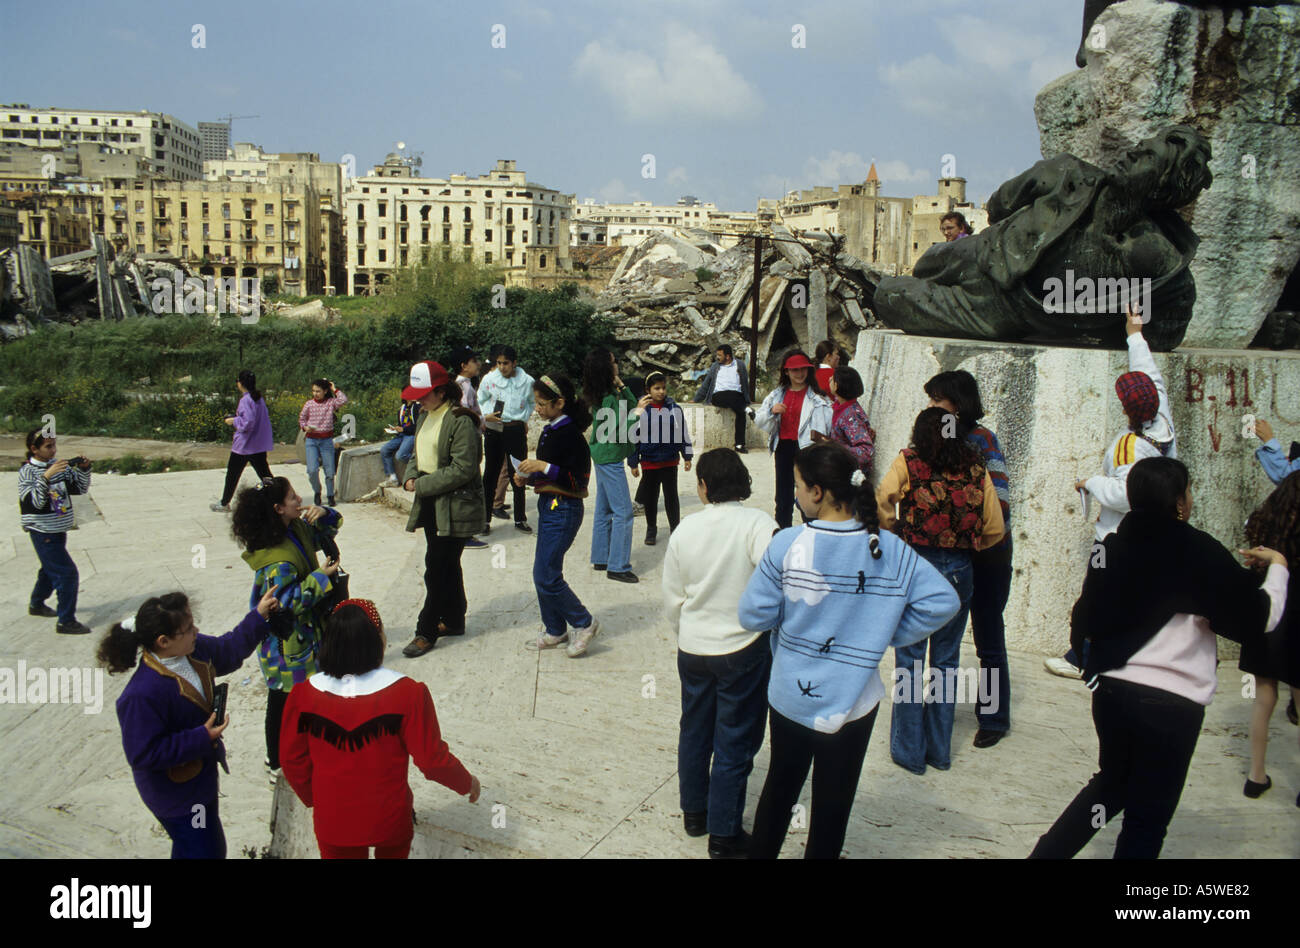 Lebanon Beirut In April 1994 After The Civil War Group Of Young Students Visiting The Destroyed Martyrs Place Stock Photo